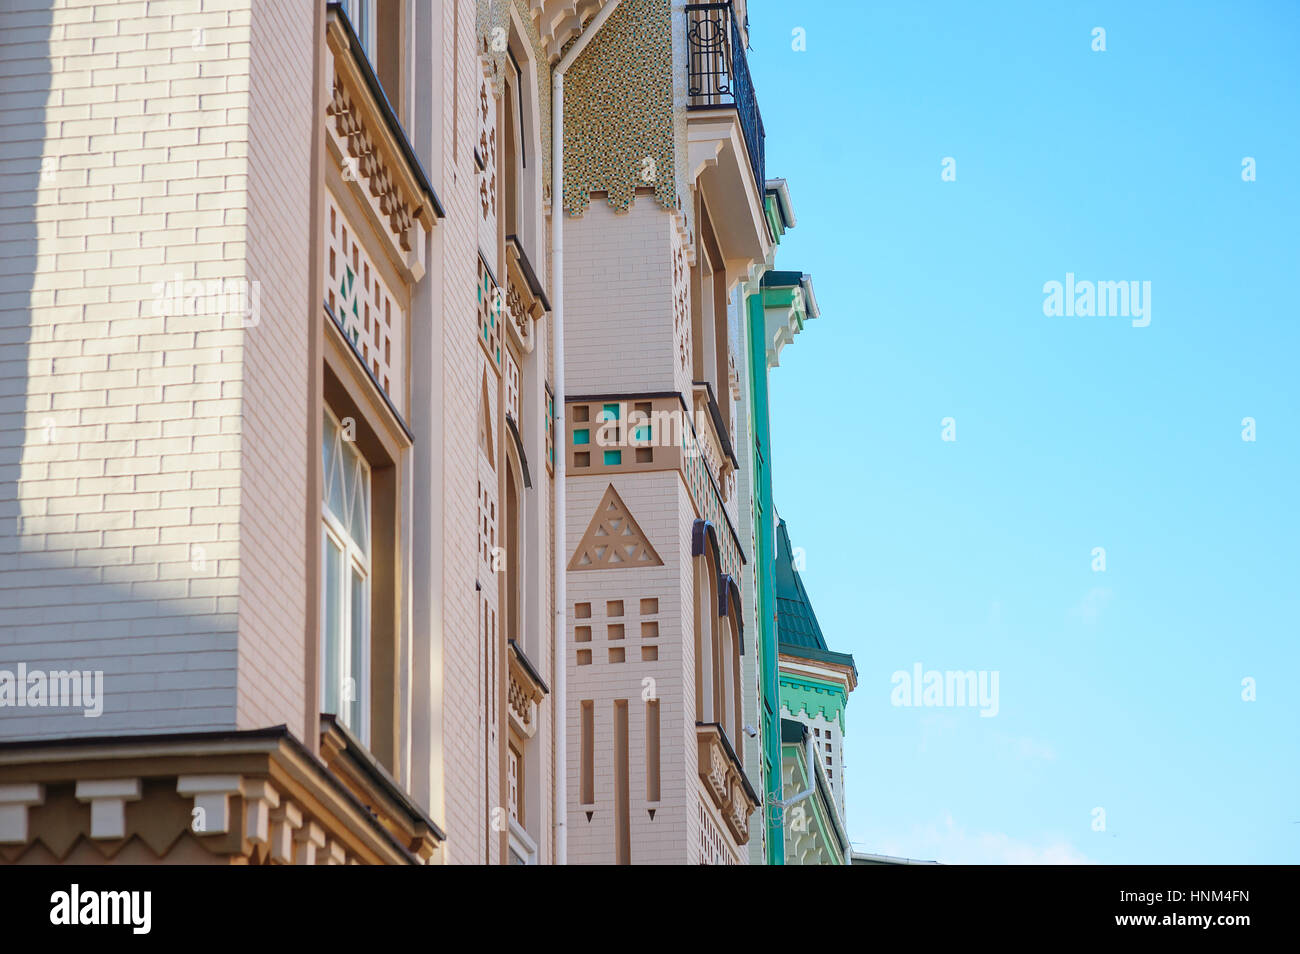 ancient architectural building with balconies Stock Photo